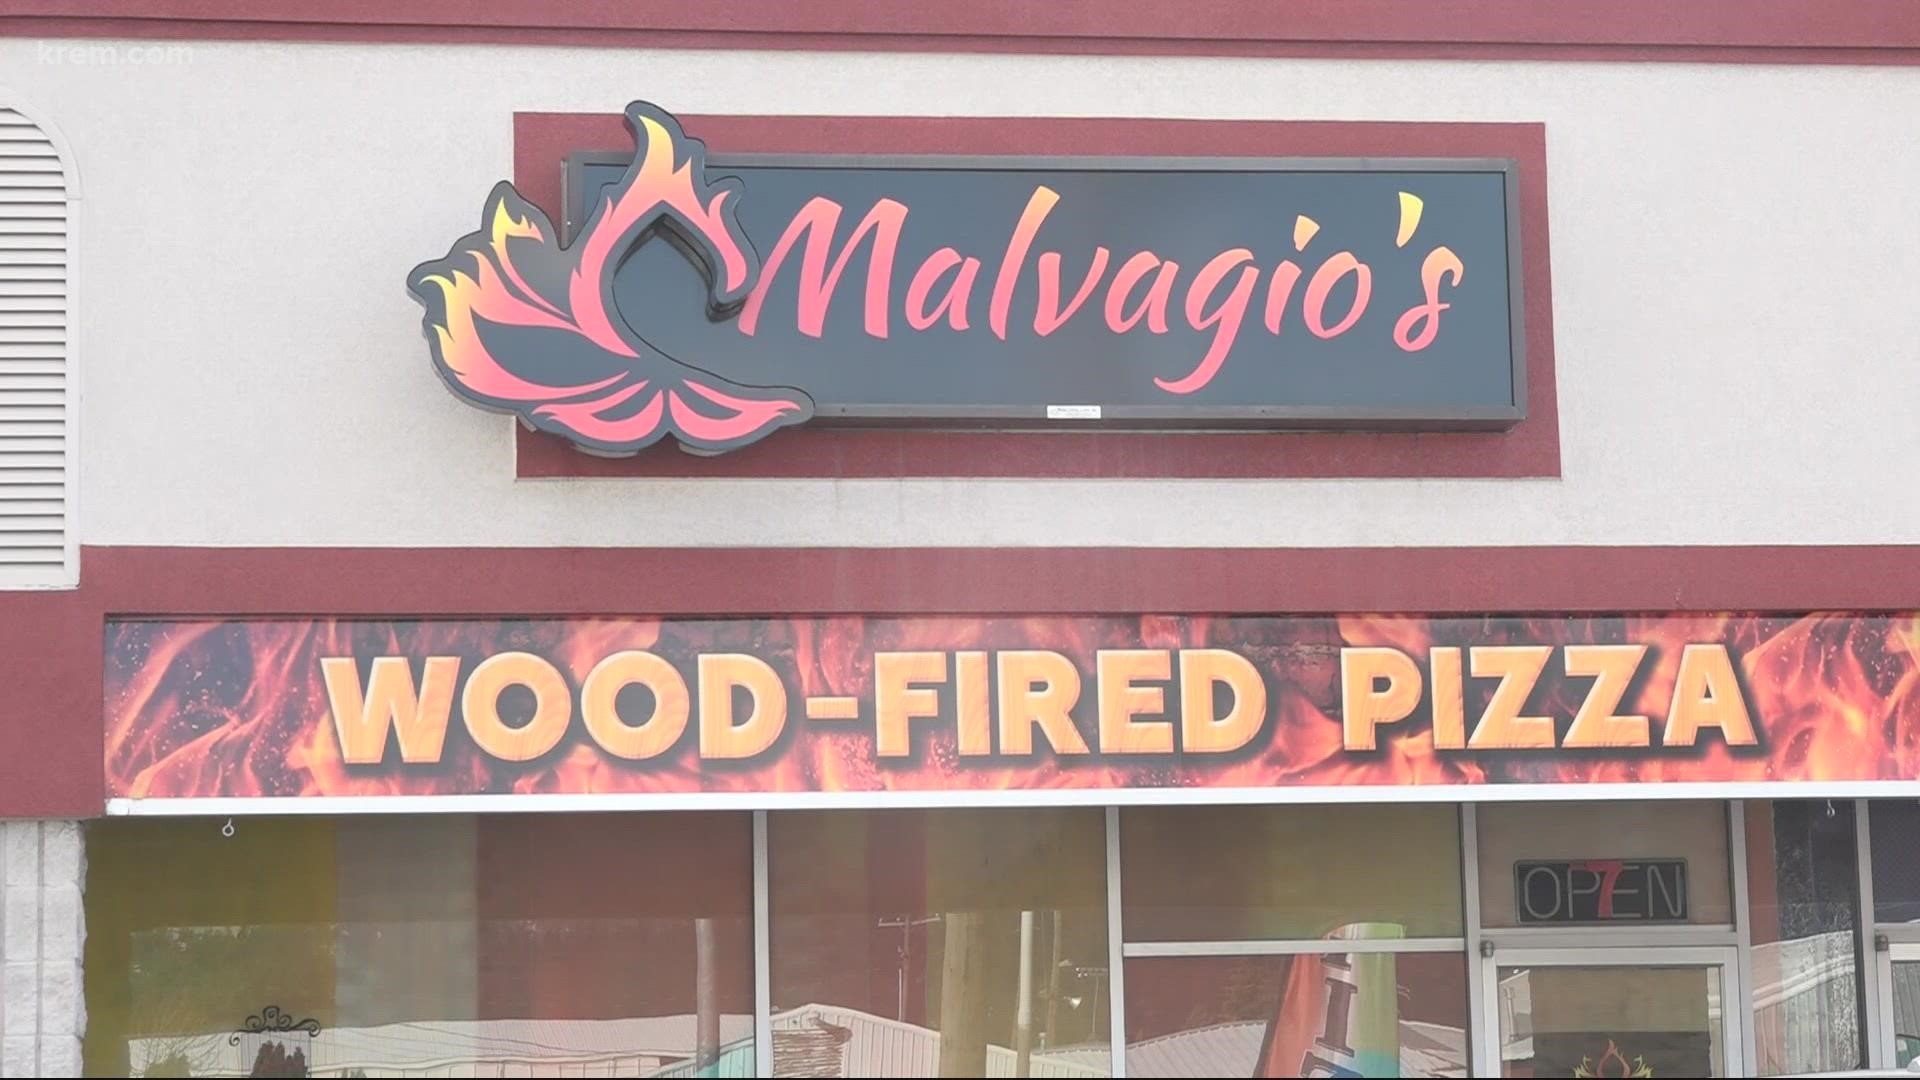 Malvagio's will donate 10% of proceeds to Ukraine aid, after the owner learned his father, who stayed in Ukraine to fight, was shot in the hip.